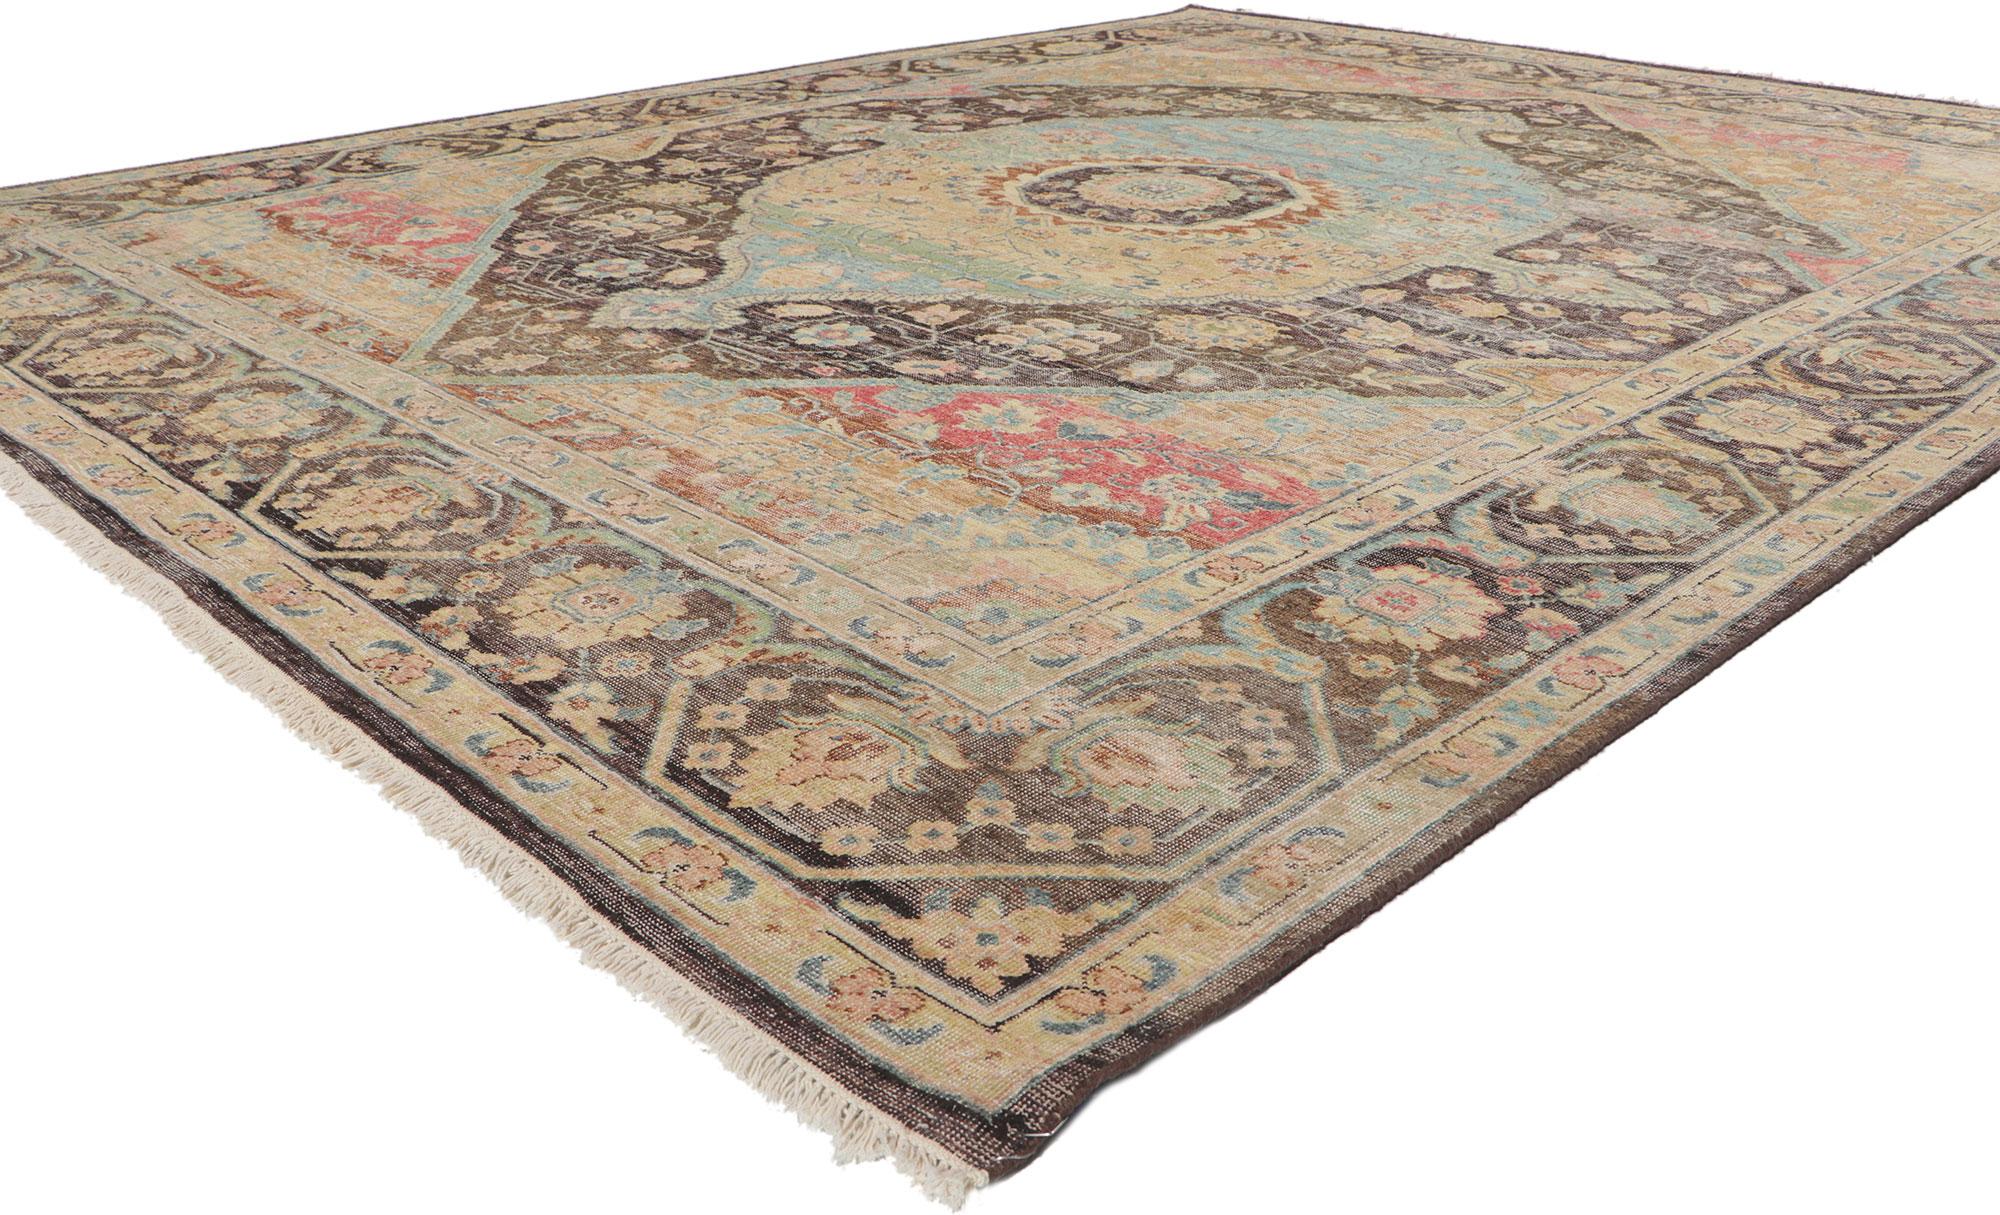 30779 New Distressed Oushak rug with Vintage Style, 08'00 x 10'00?.? ?Emanating traditional sensibility and rugged beauty with a cozy color palette, this hand-knotted wool distressed Indian Oushak rug creates an inimitable warmth and calming